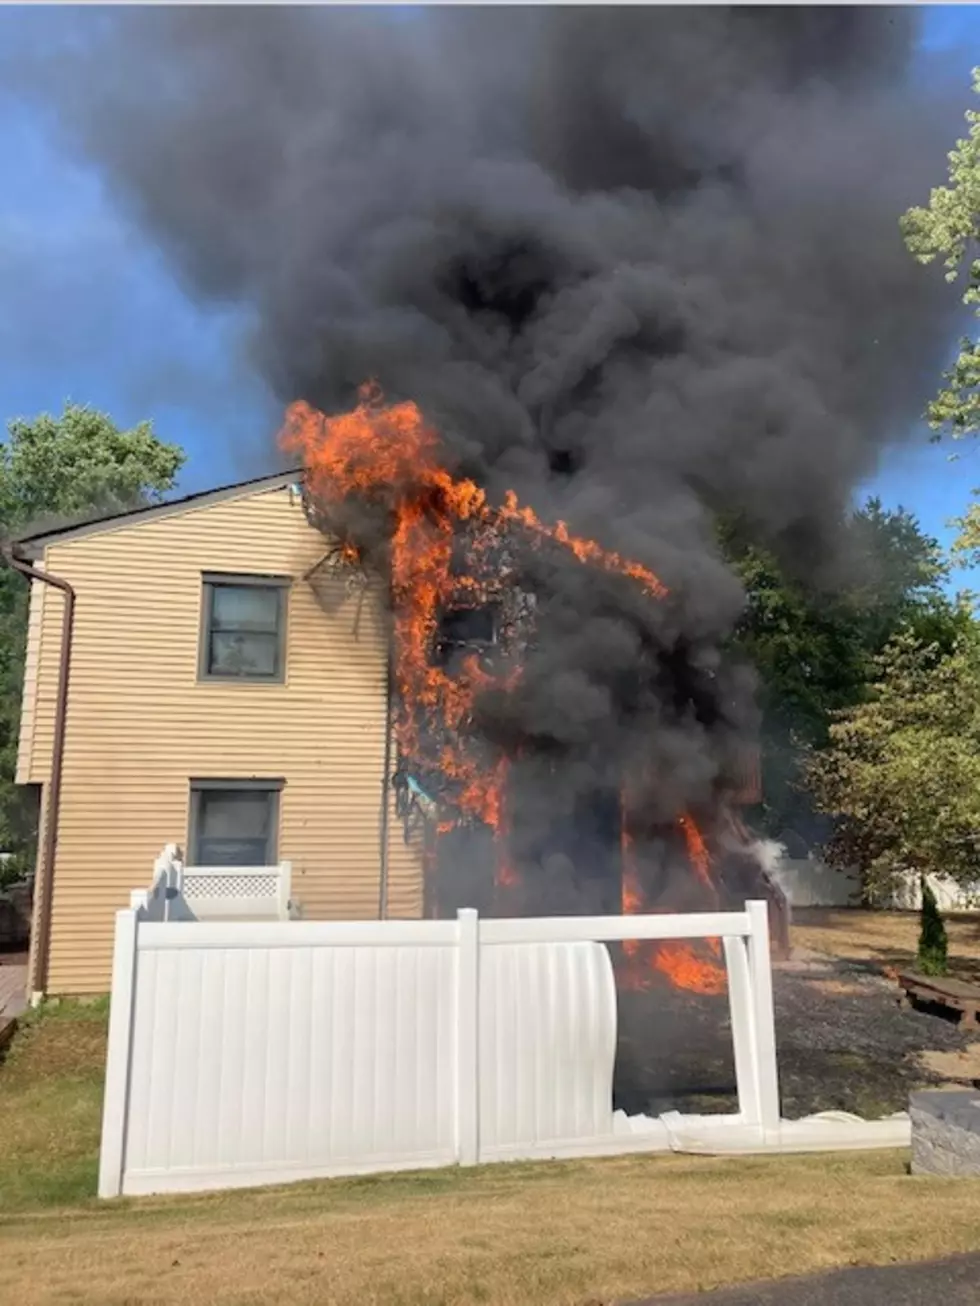 Two separate weekend fires in Marlboro, NJ remain under investigation